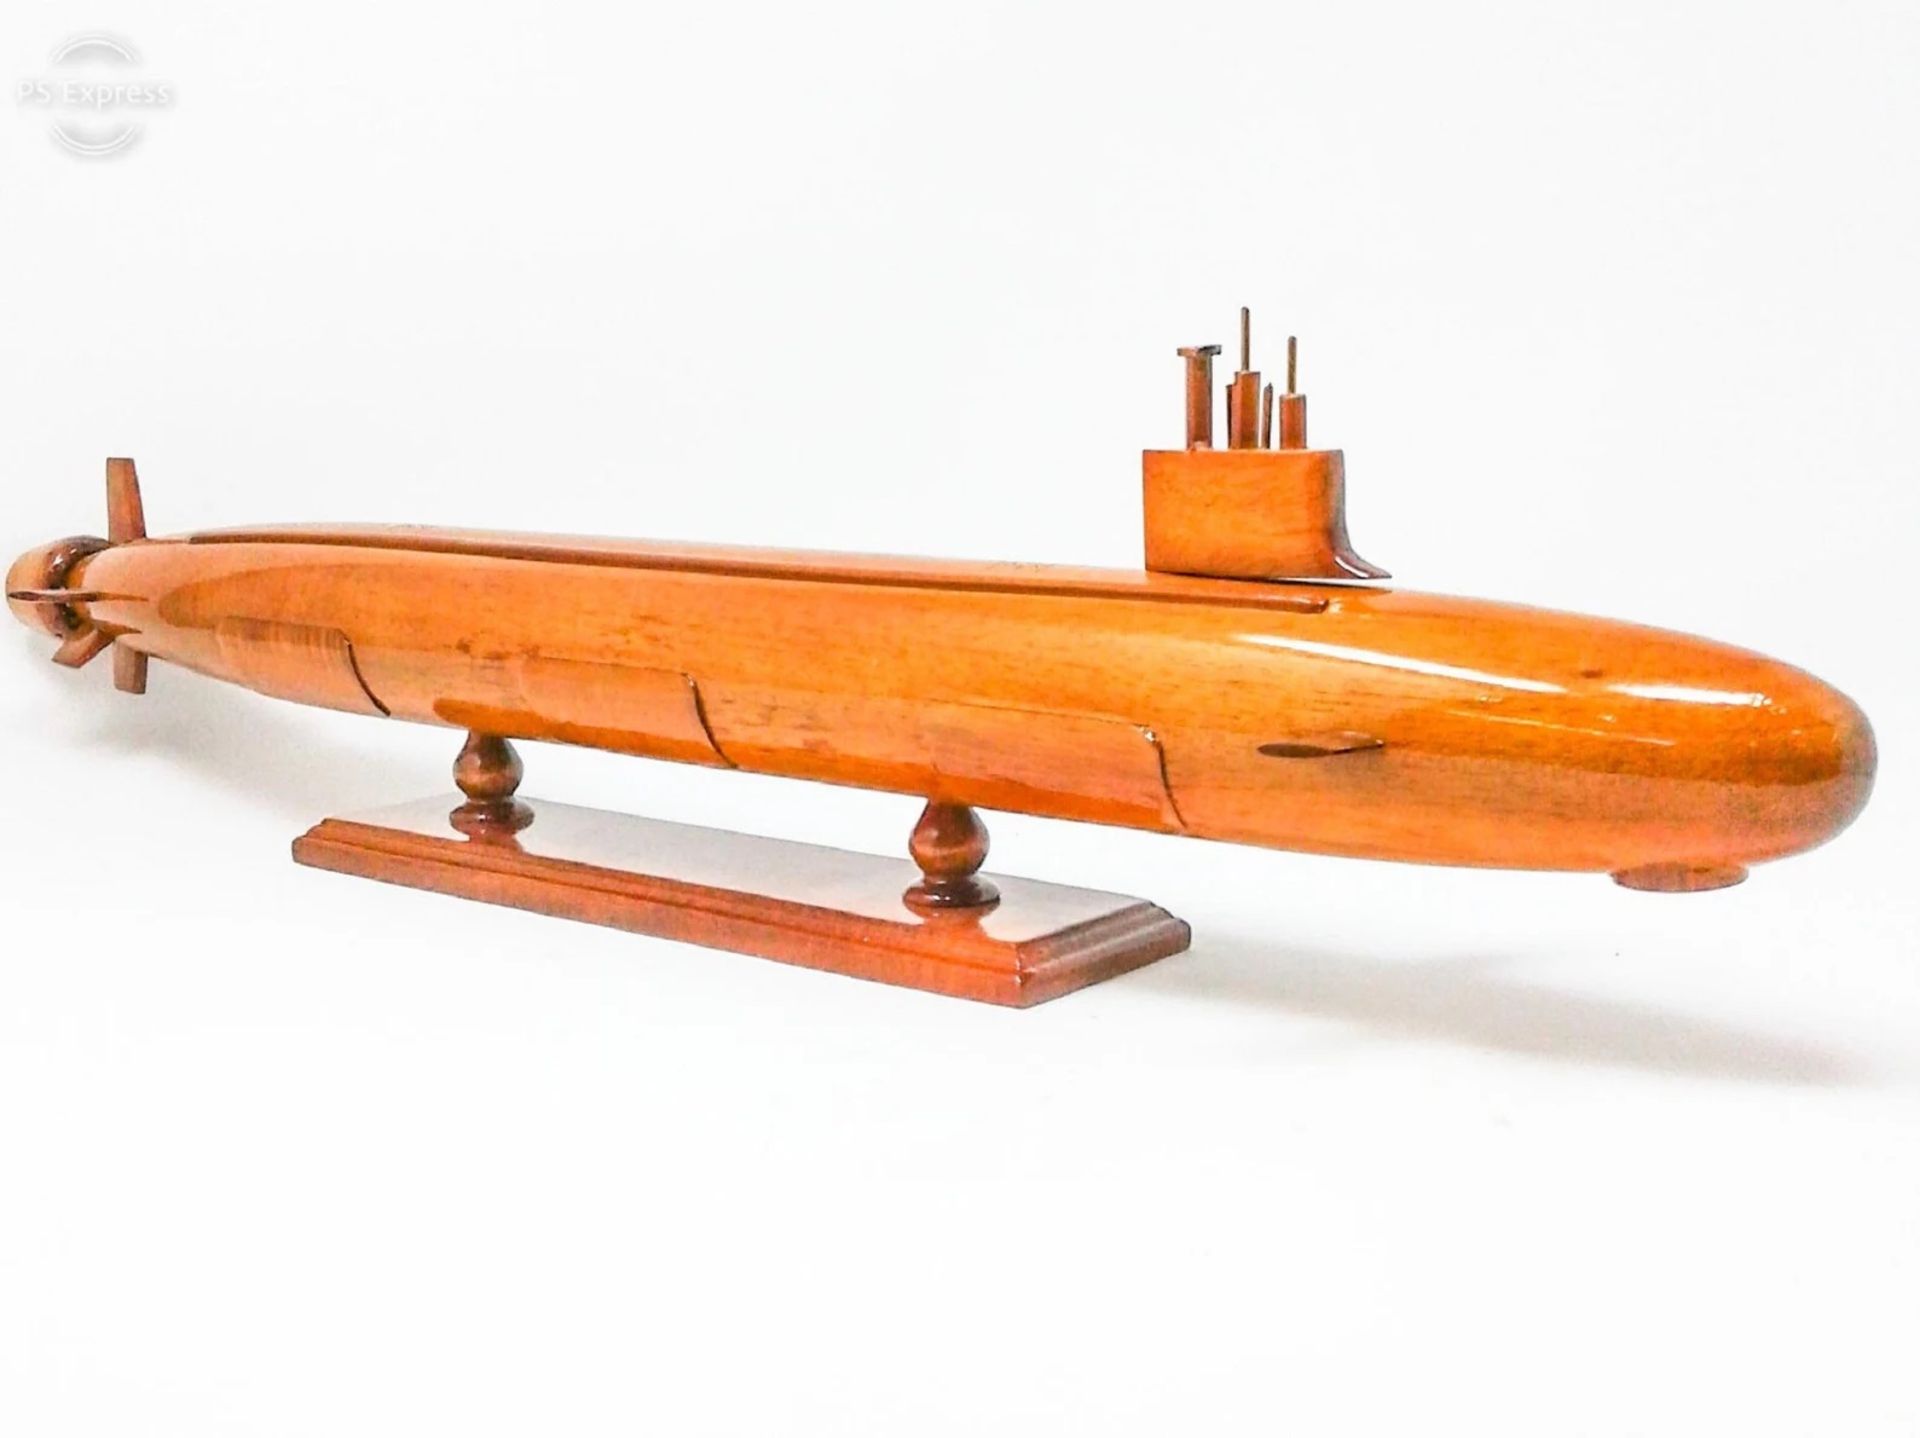 Virginia Class Submarine Scale Wooden Seacraft Model - Image 3 of 4